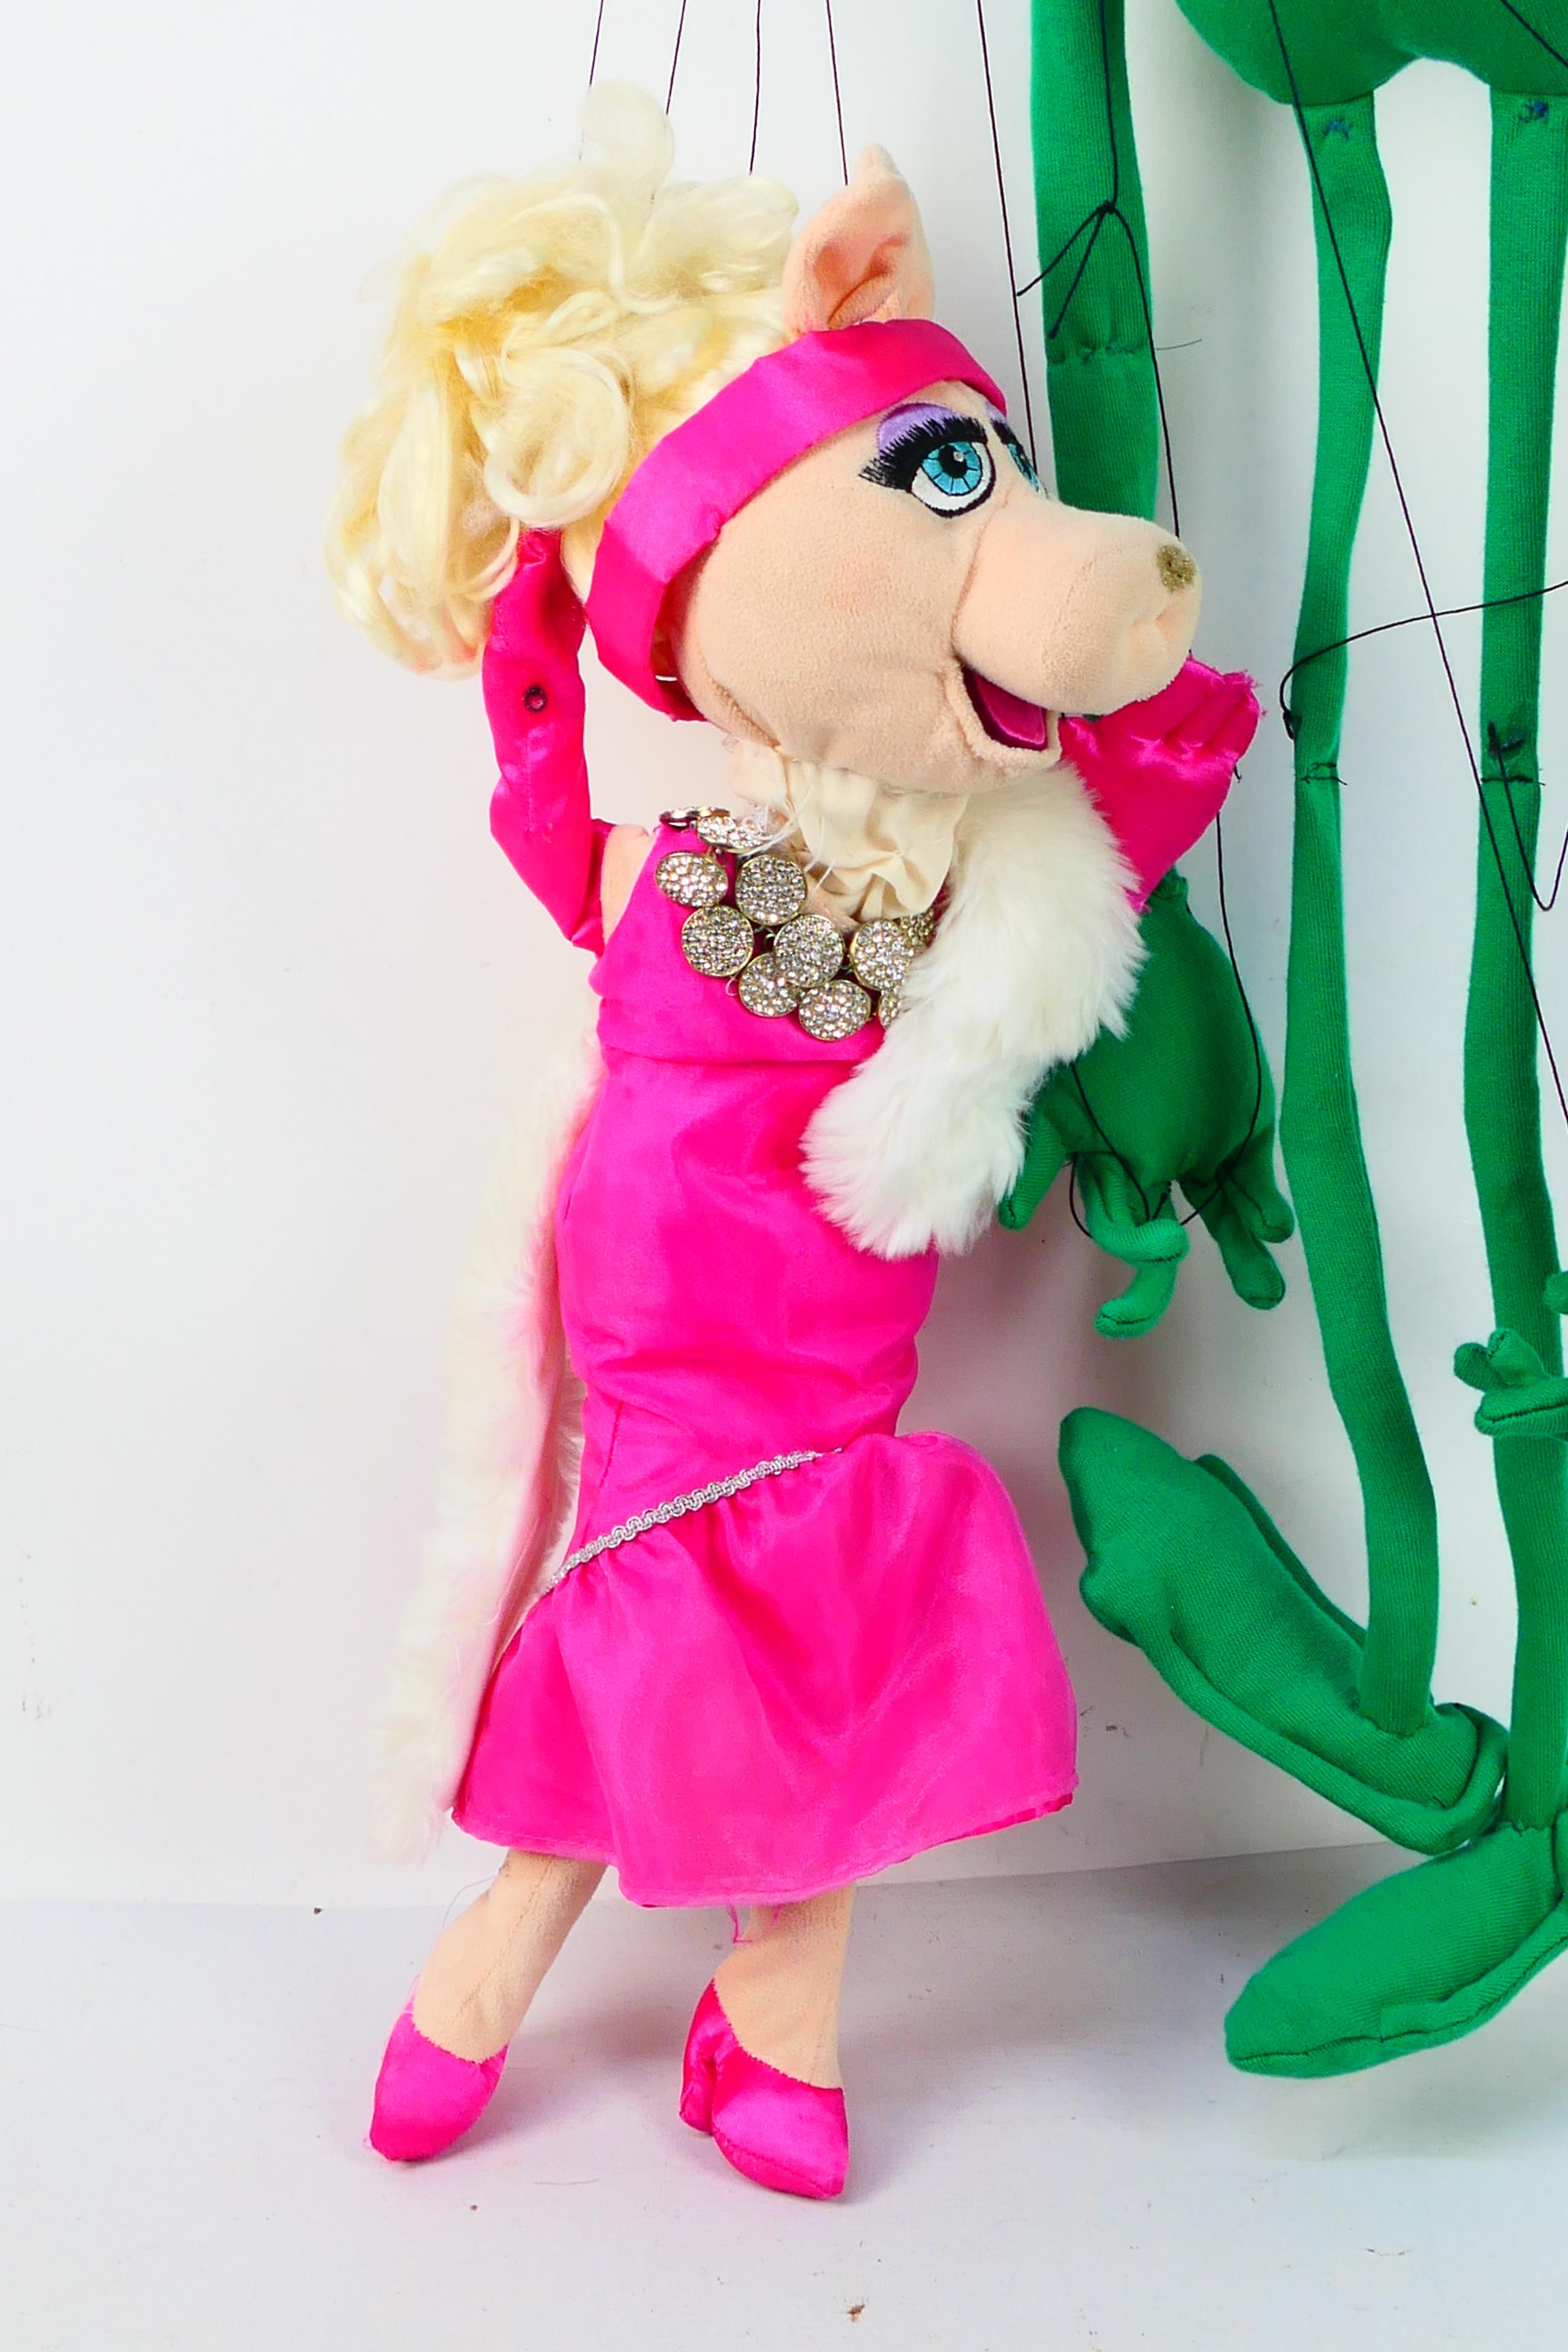 Marionettes - Kermit the Frog - Miss Piggy. - Image 2 of 7